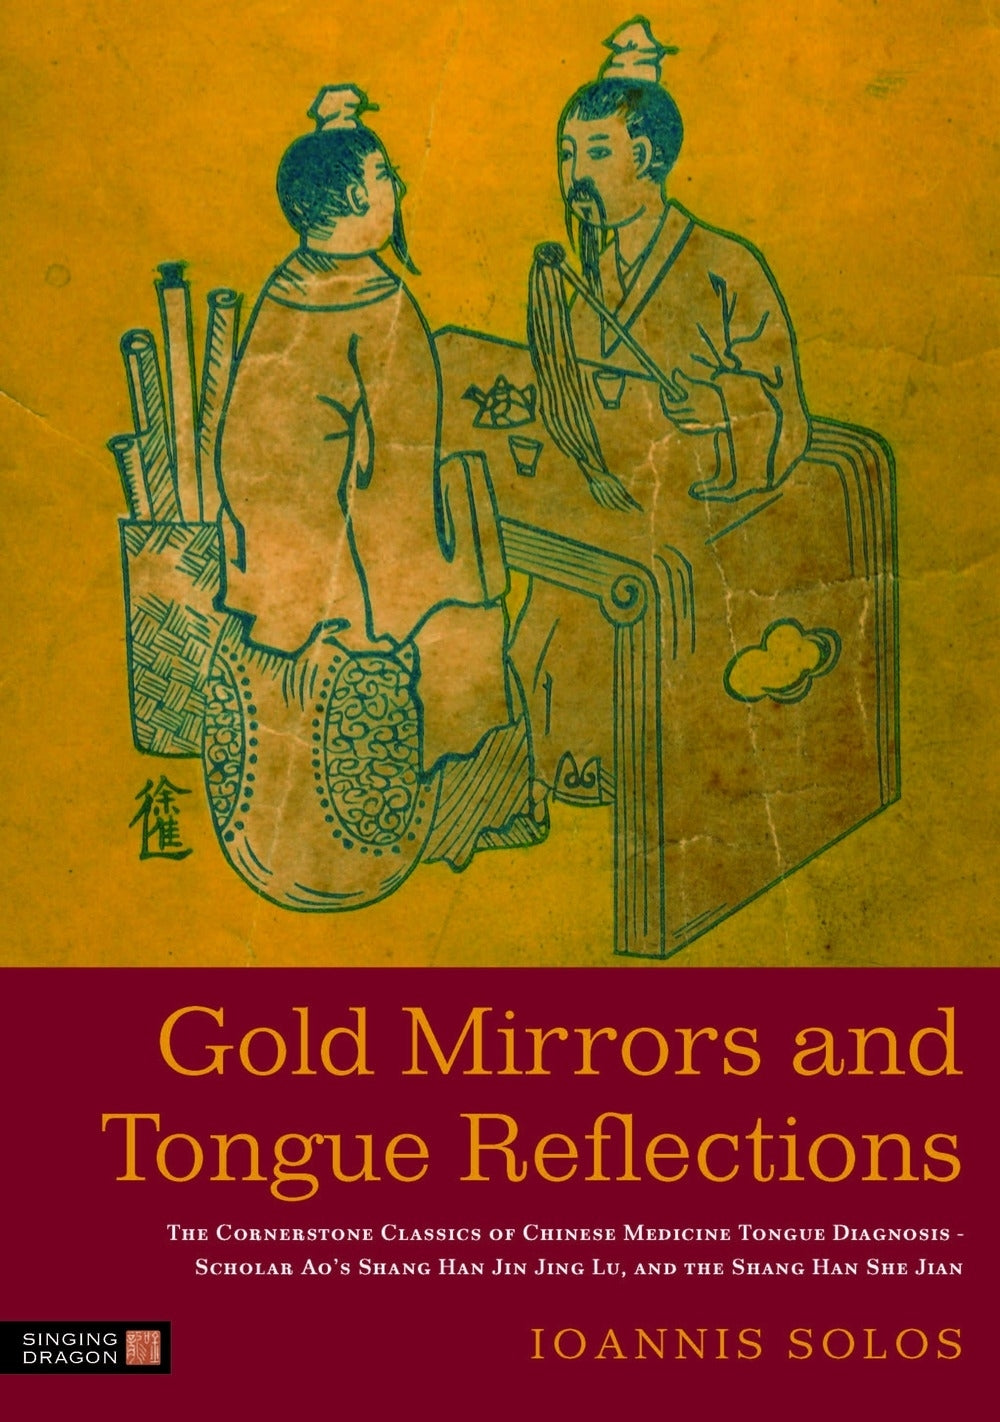 Gold Mirrors and Tongue Reflections by Liang Rong, Chen Jia-Xu, Ioannis Solos